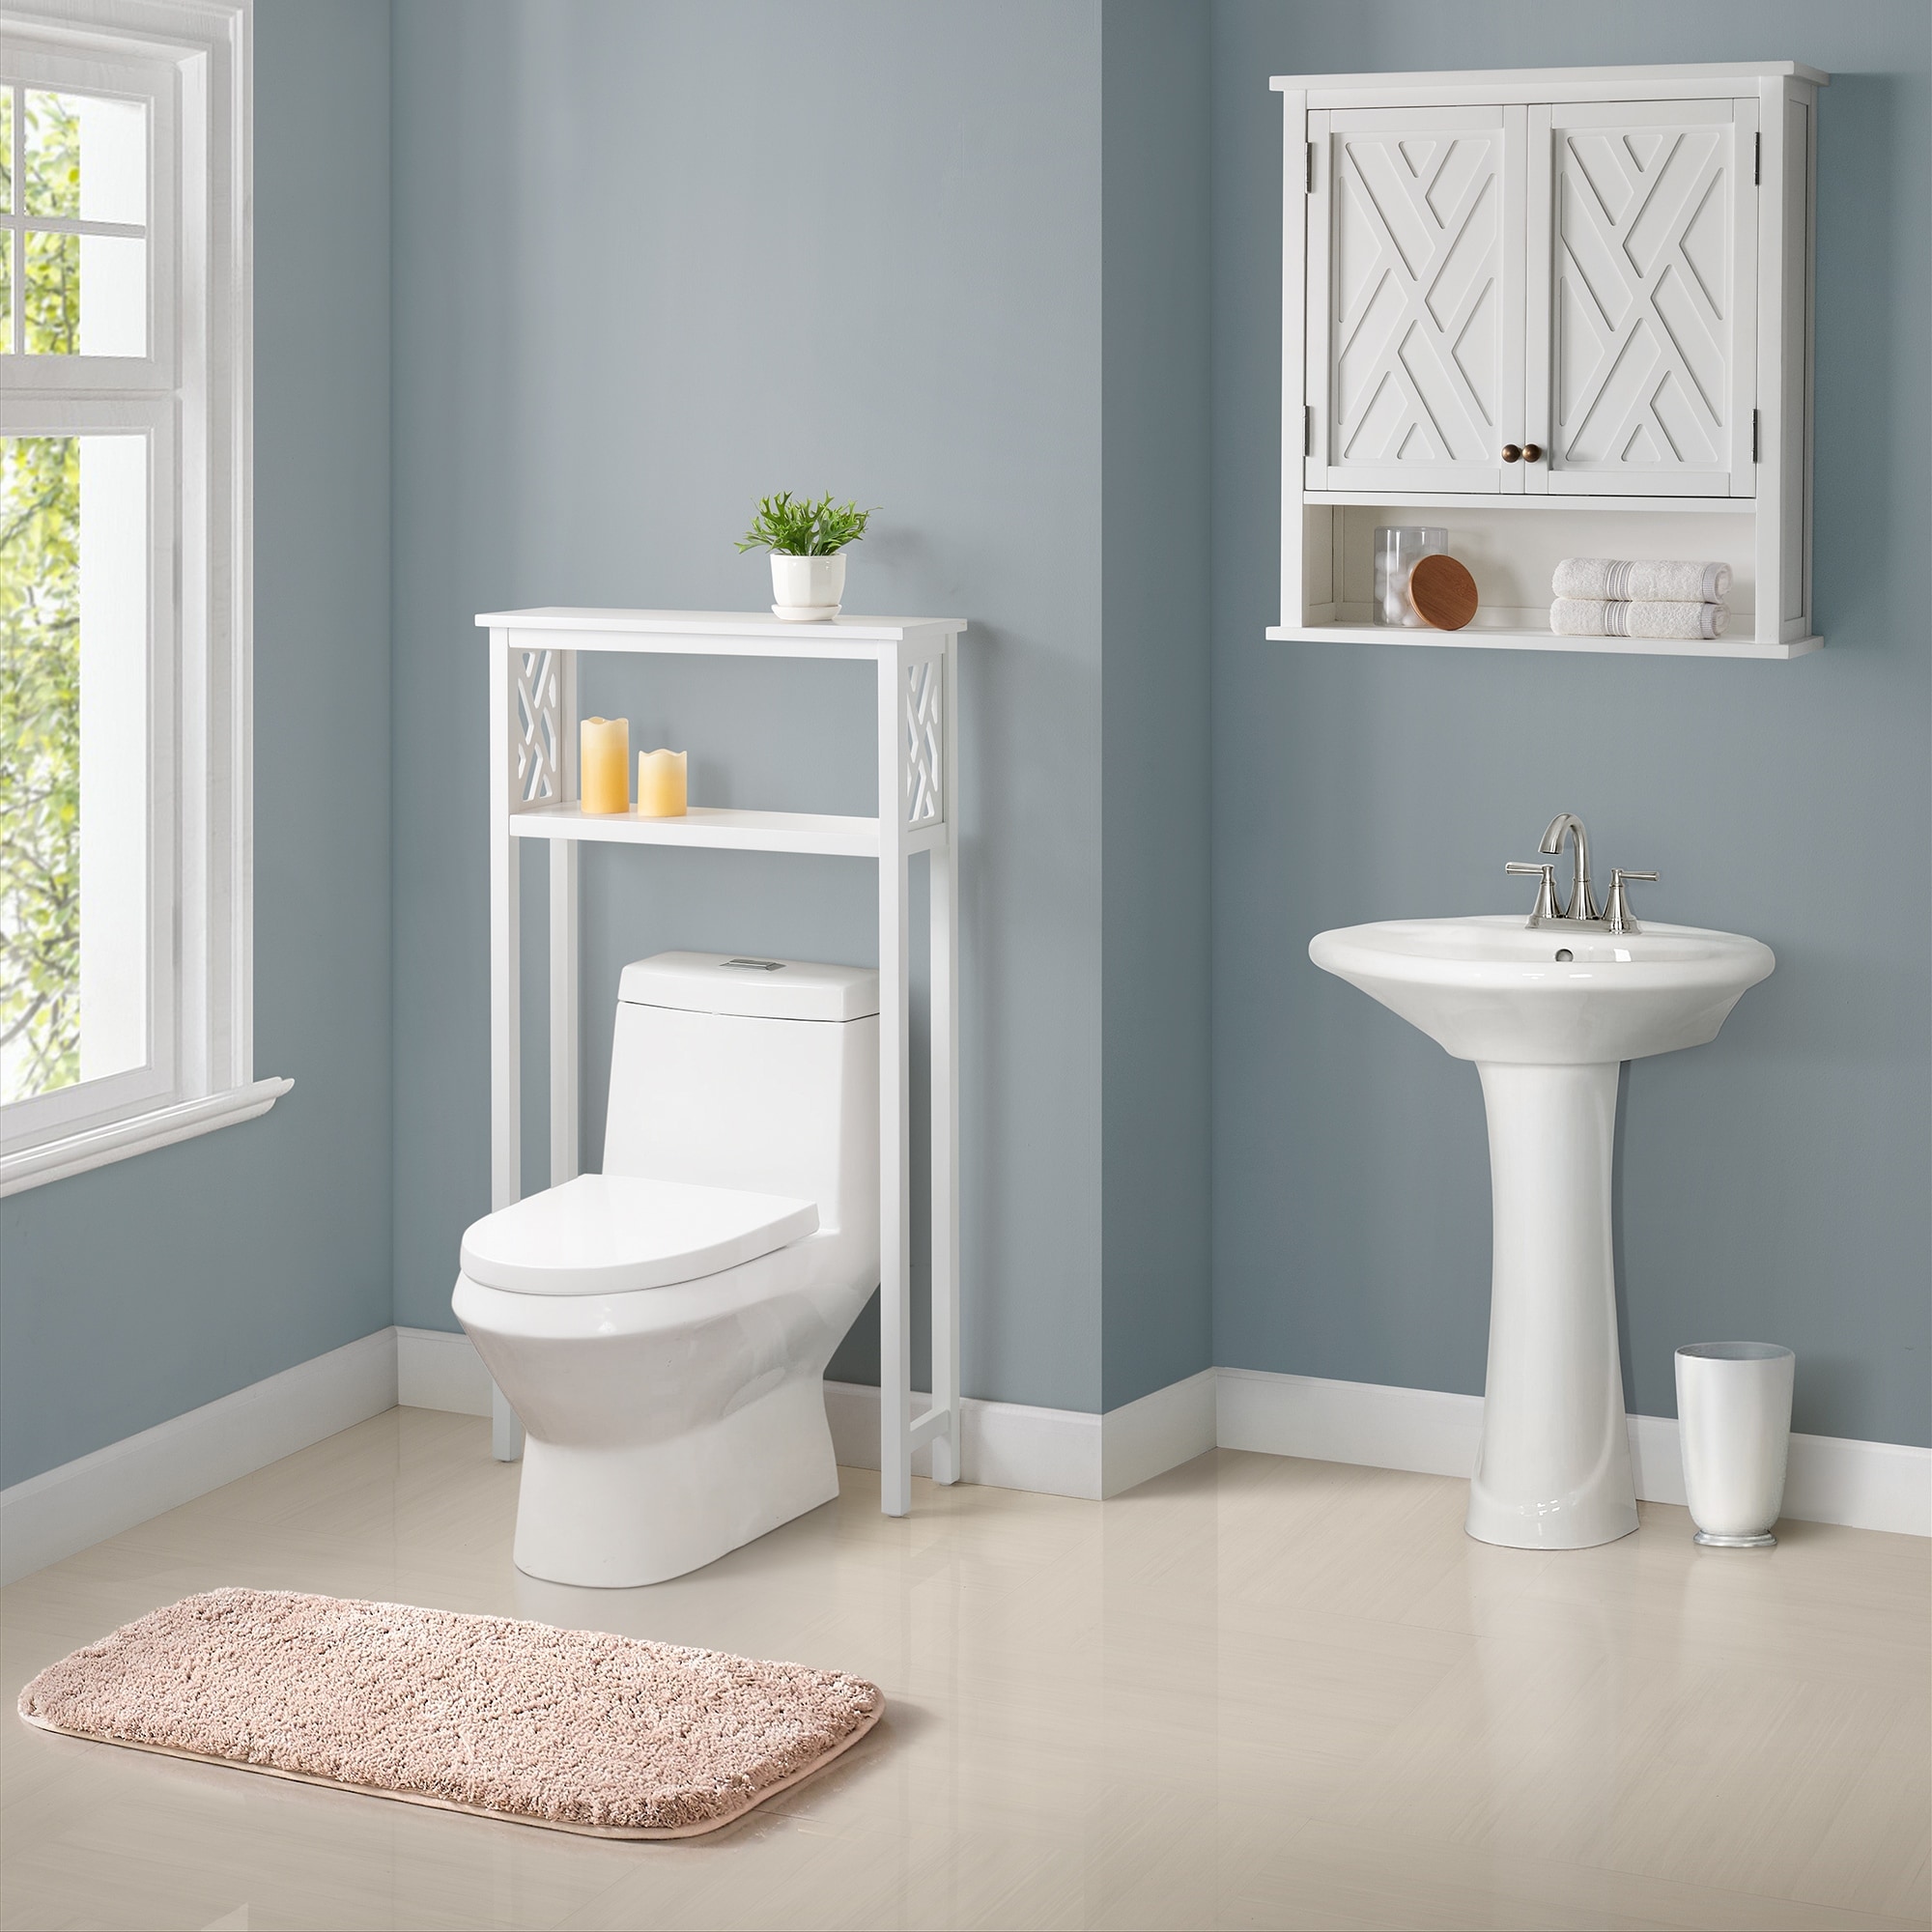 https://ak1.ostkcdn.com/images/products/is/images/direct/6dfd59823dc62664159f00ef5c86c55f2a22d0ba/Porch-%26-Den-Altadena-Bath-Over-Toilet-Storage-Shelf-and-Wall-Mounted-Cabinet-Set.jpg